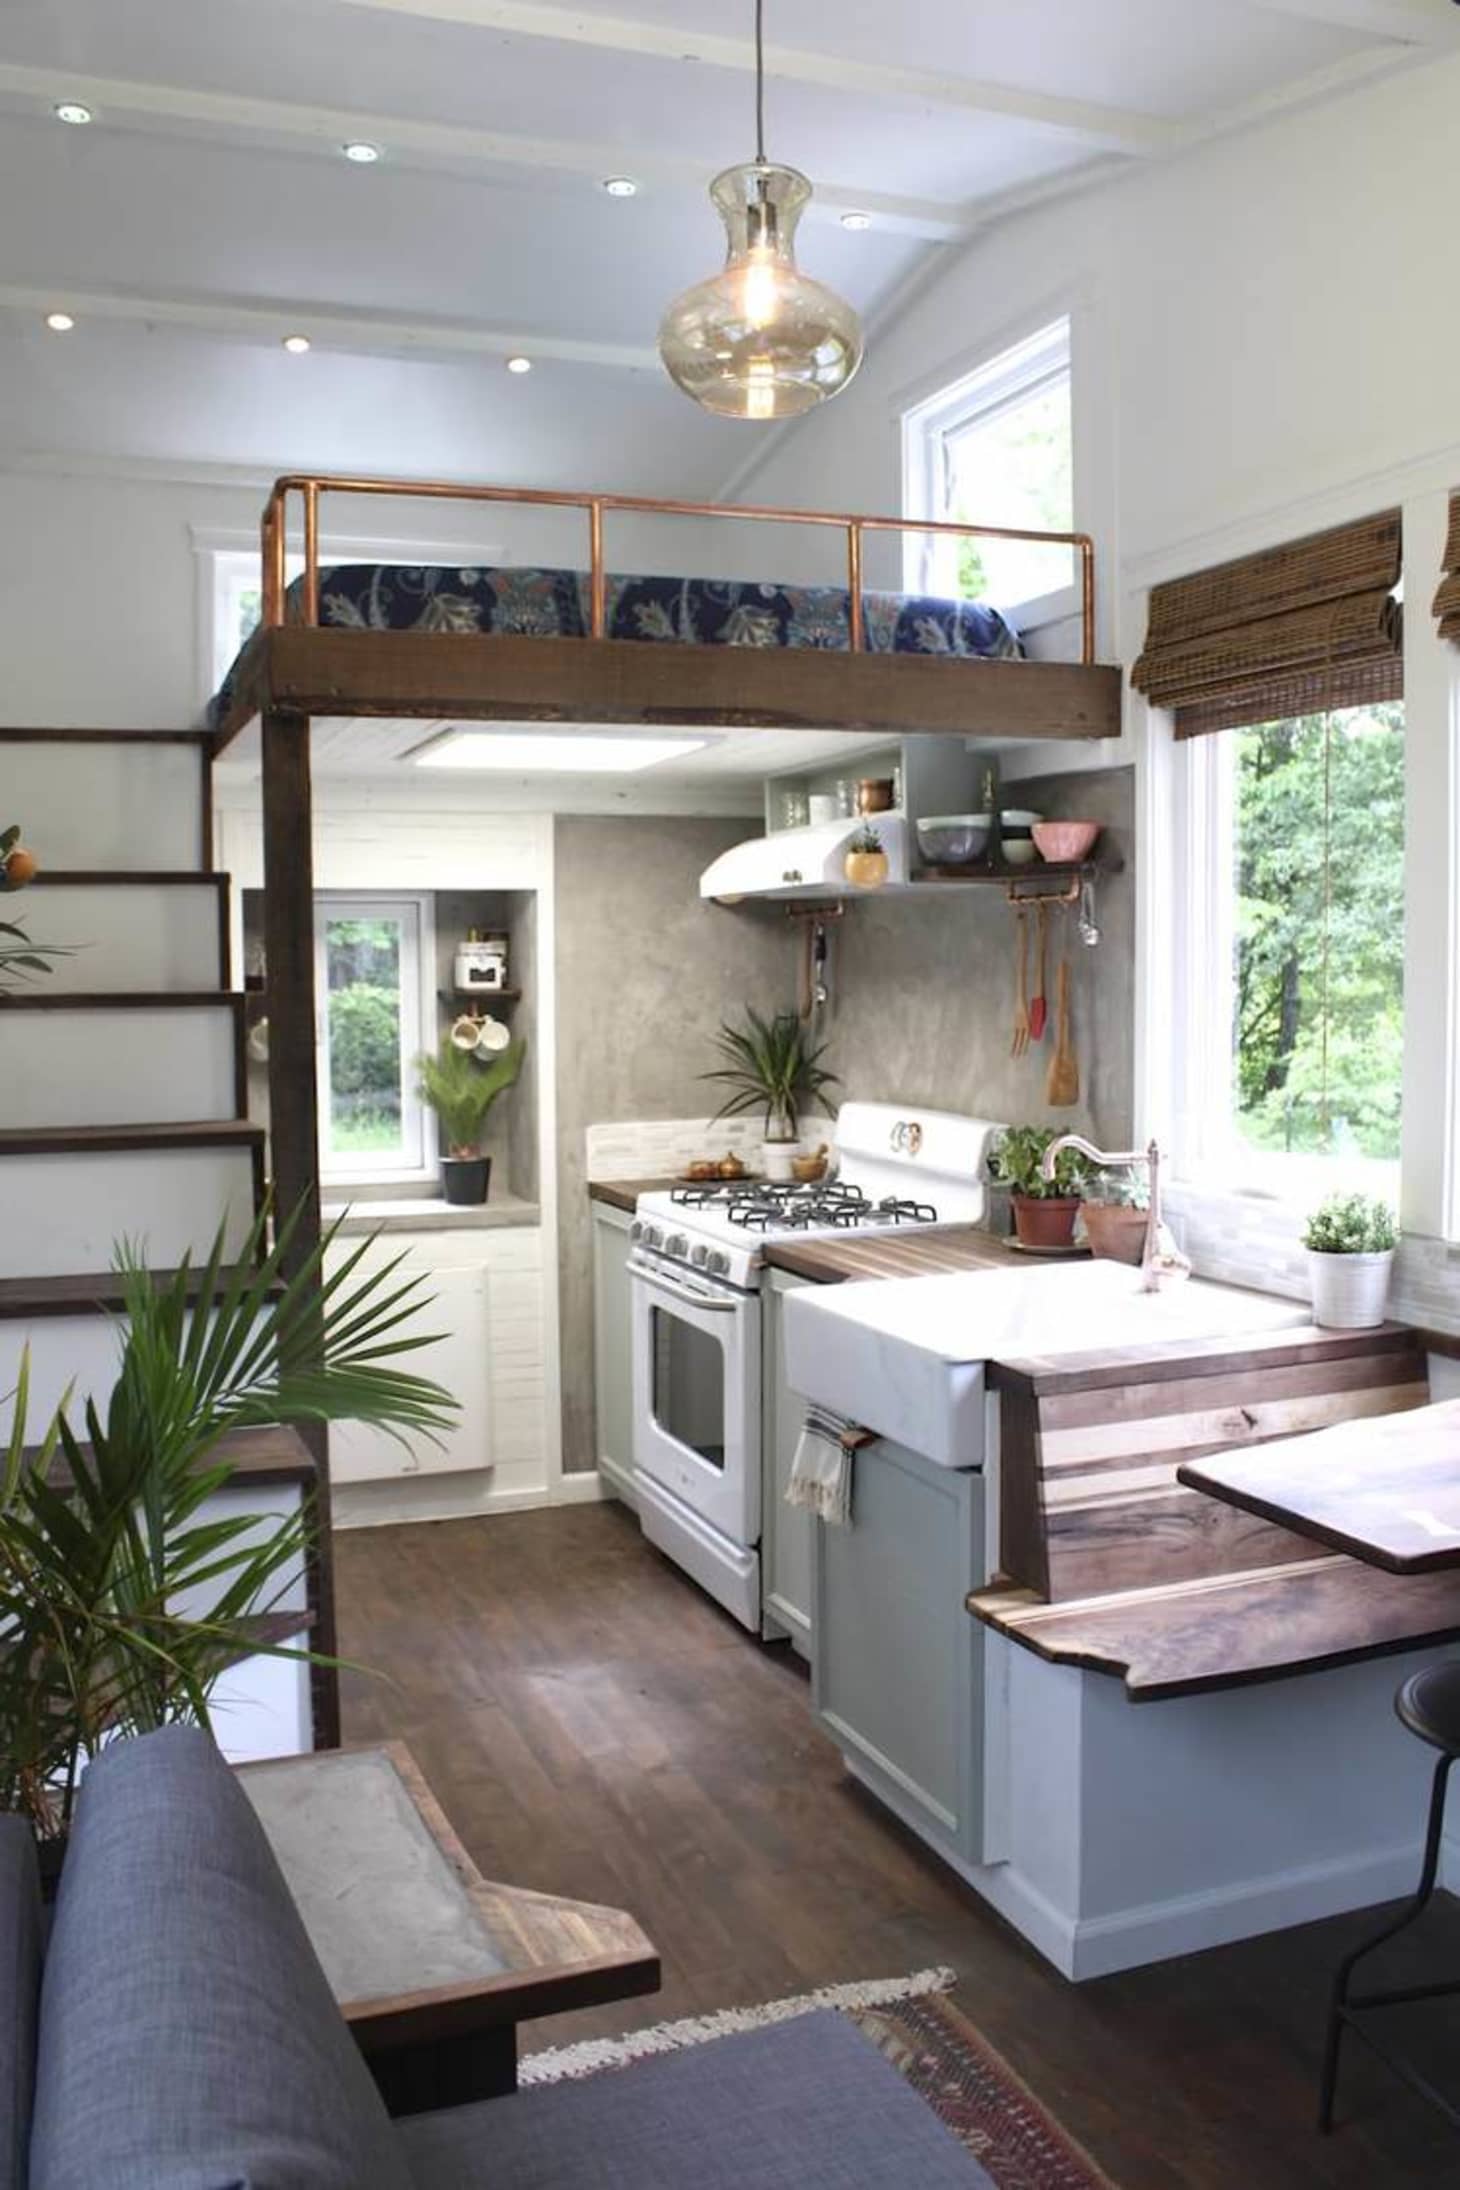 7 Kitchen Storage Ideas to Steal from Tiny Houses | Kitchn